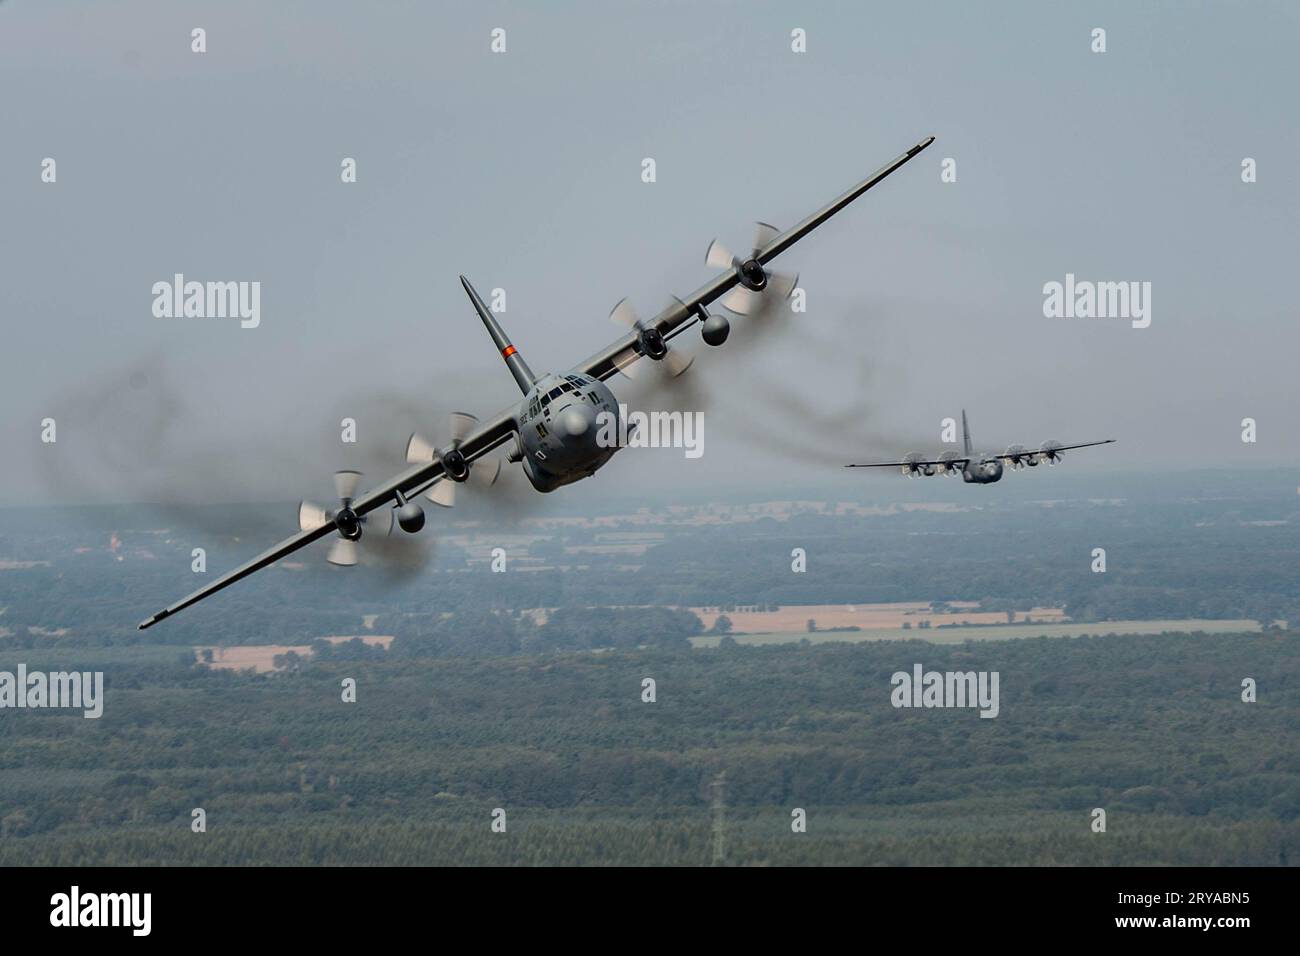 rd Air Base, Poland, Poland. 12th Sep, 2023. U.S. Air Force C-130J Super Hercules aircraft, from the 37th Airlift Squadron, Ramstein Air Base, Germany, fly in a three plane formation with the 182nd Airlift Wing, Illinois Air National Guard, out of 33rd Air Base, Poland during Aviation Detachment Rotation 23-4, Sept. 12, 2023. Members of the 86th Airlift Wing, 435th Air Ground Operations Wing, and 182nd AW, Illinois Air National Guard, deployed to Poland to support Aviation Detachment Rotation 23-4. Credit: U.S. Air Force/ZUMA Press Wire/ZUMAPRESS.com/Alamy Live News Stock Photo